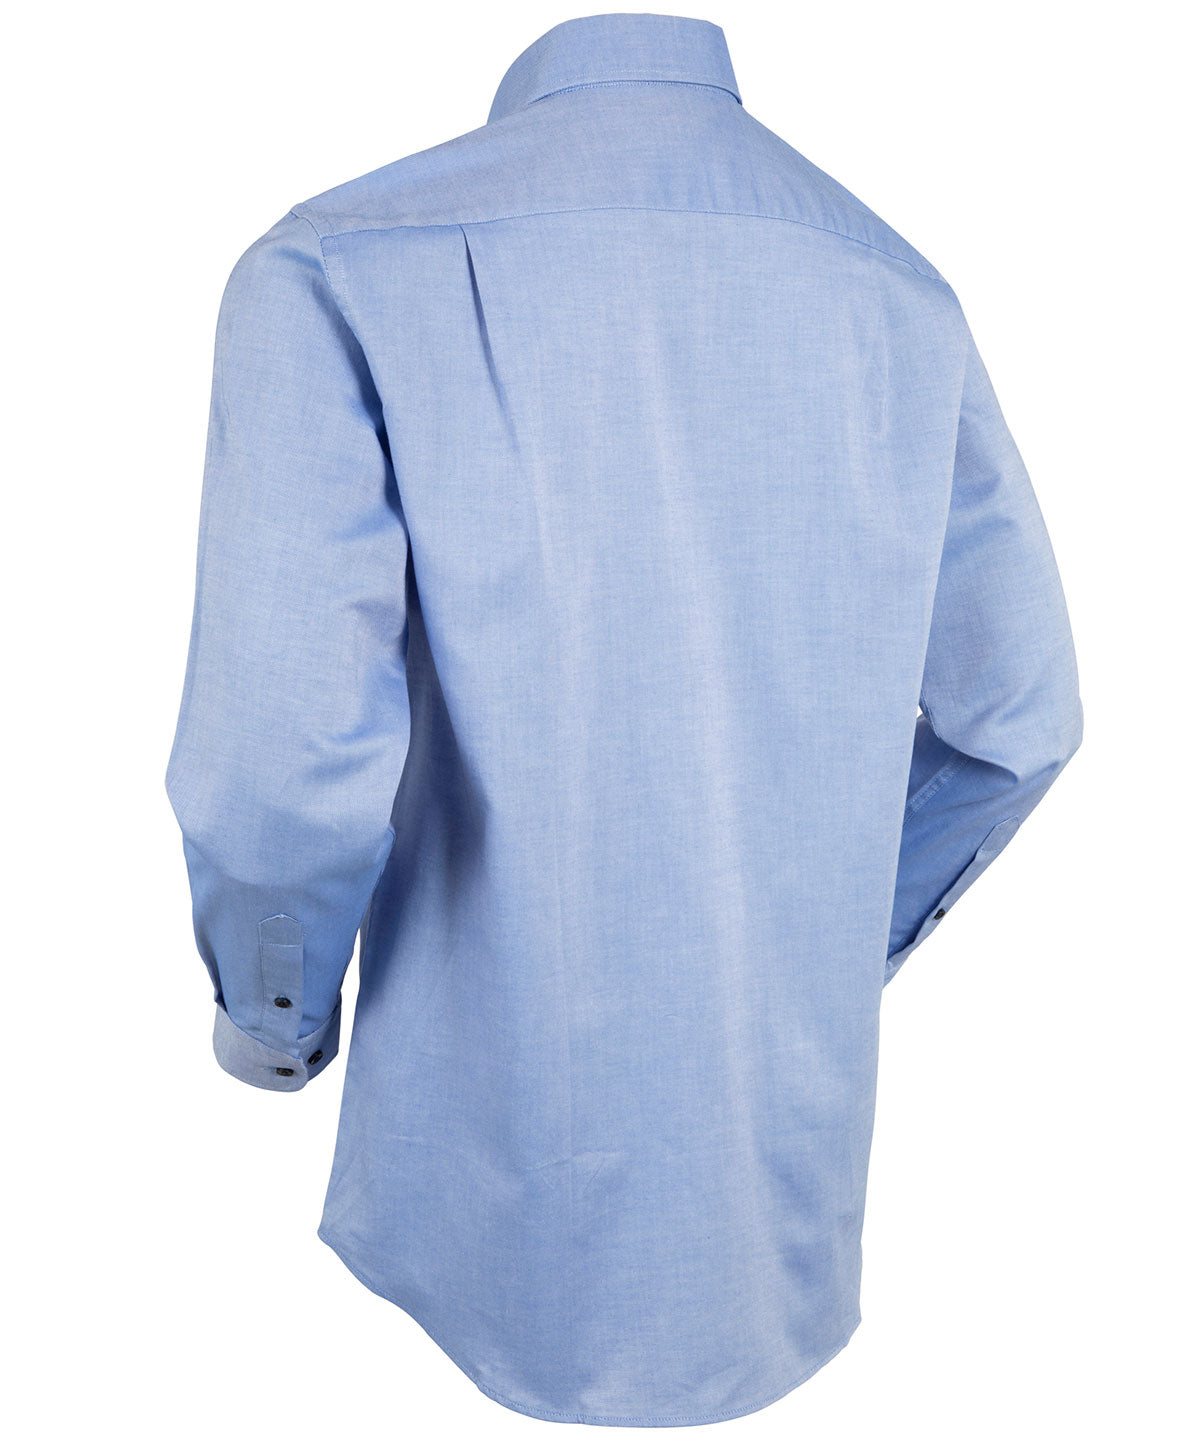 Signature Oxford Long Sleeve Sport Shirt with Contrast Buttons